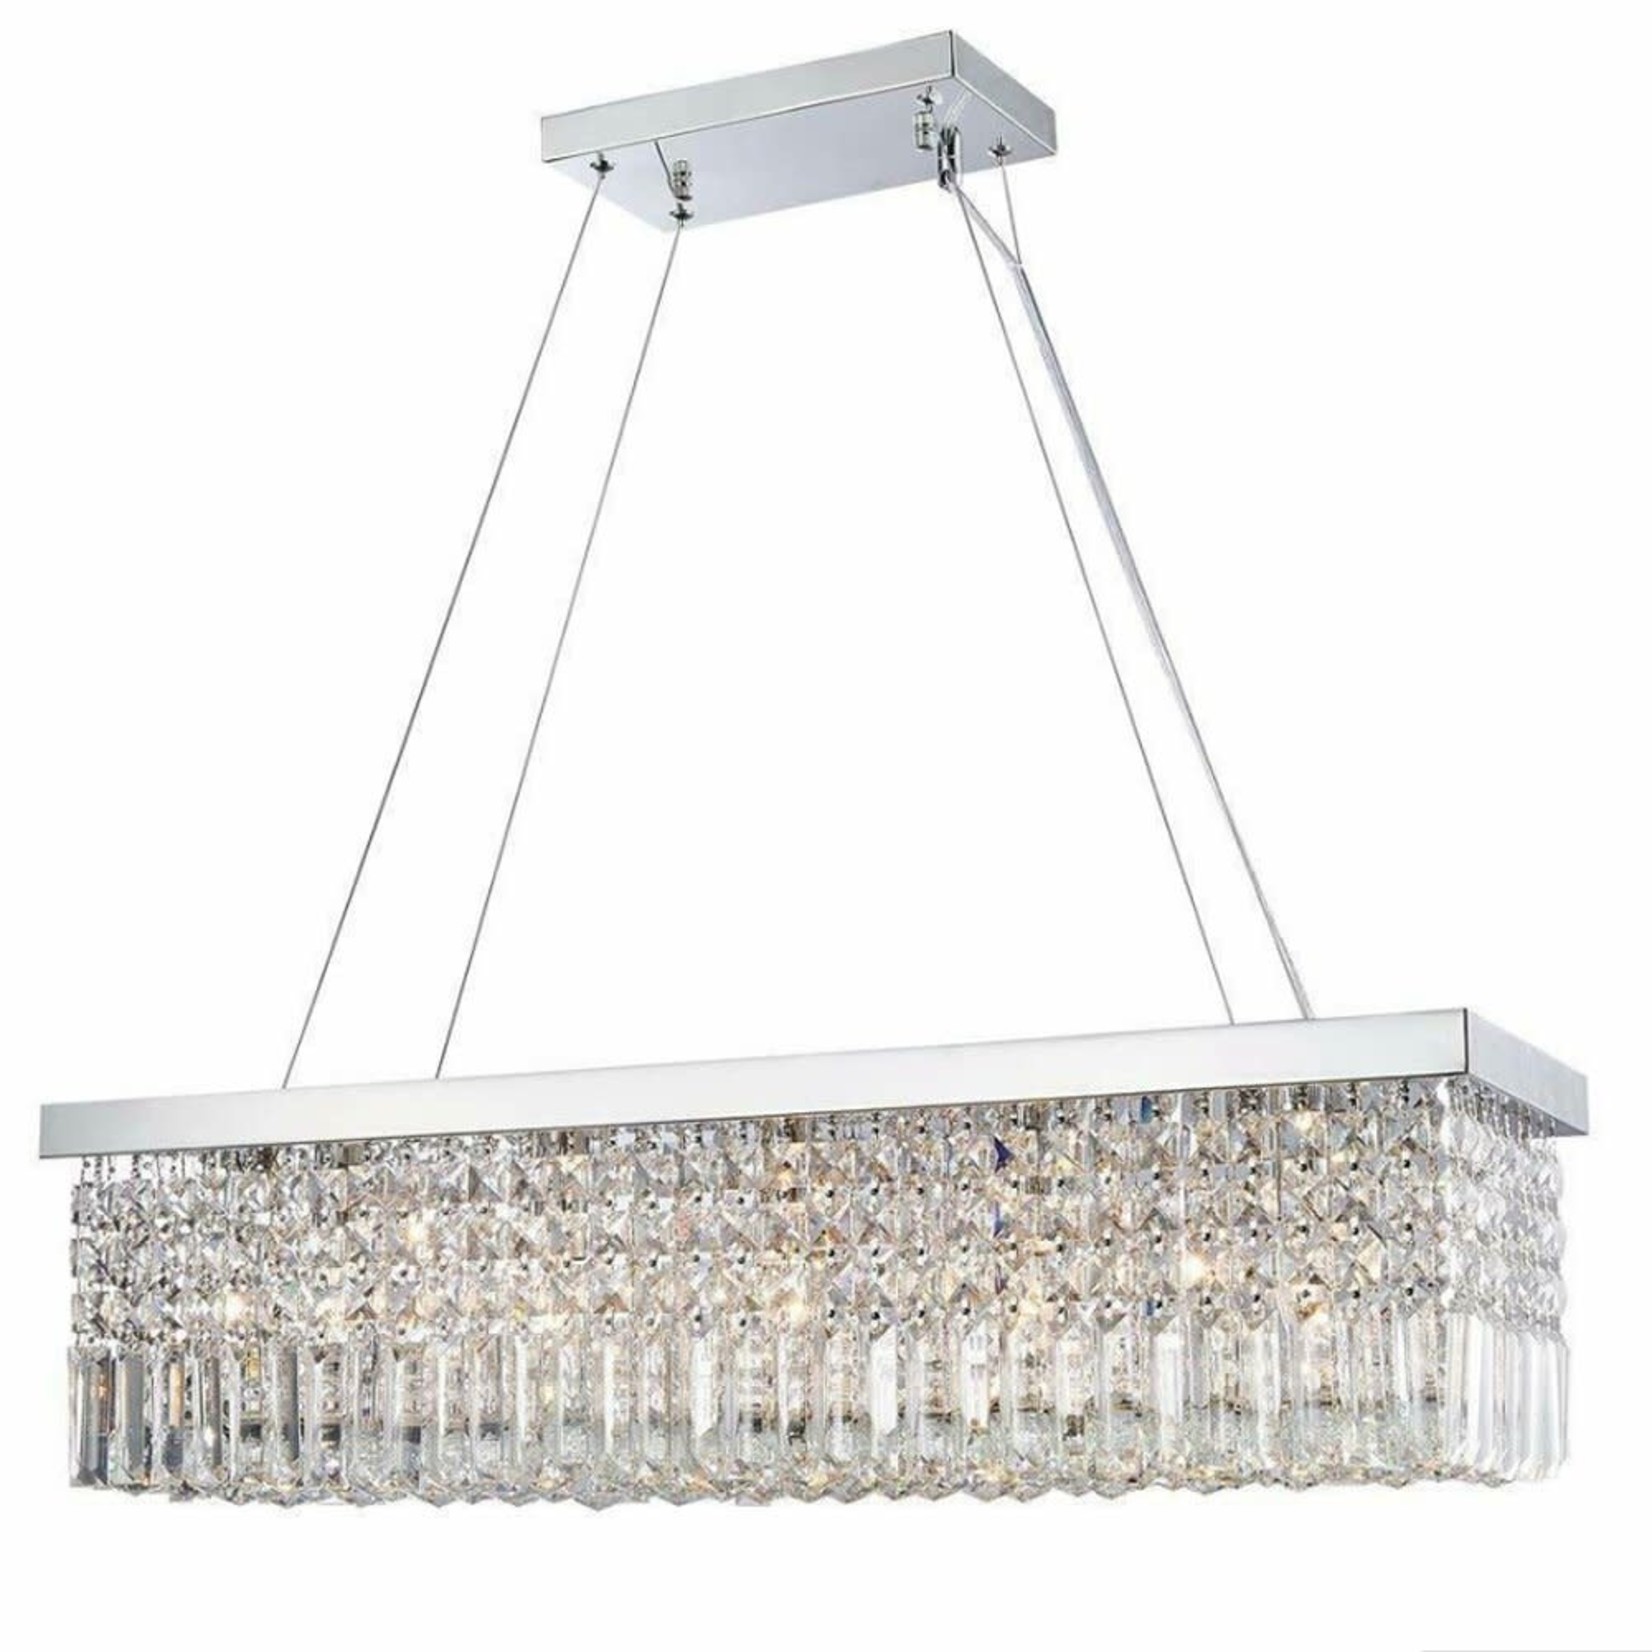 *Jonas 5 - Light Unique Chandelier with Crystal Accents - Slight Damage